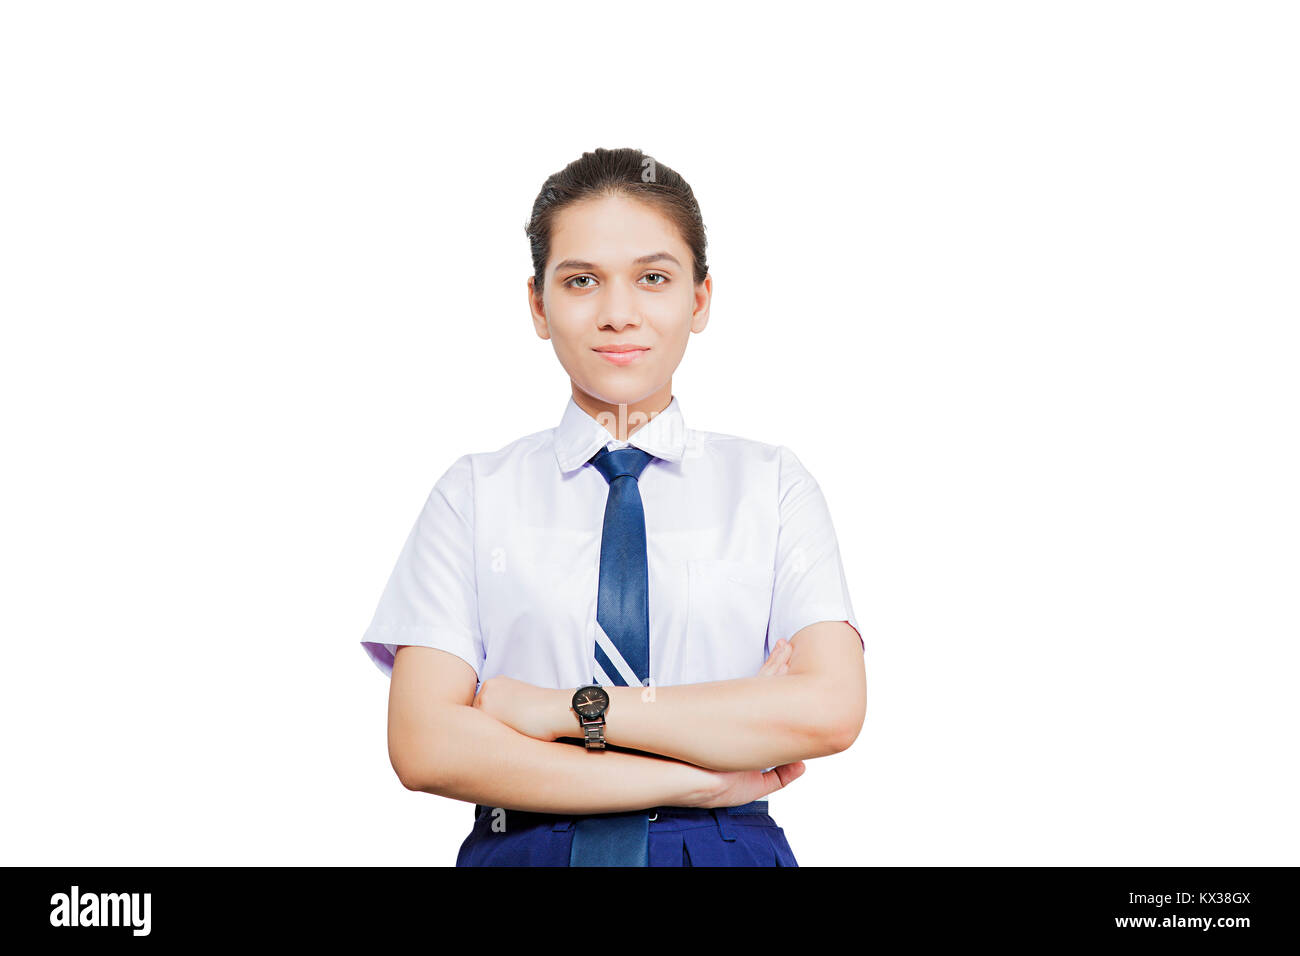 1 Indian High School Girl Student Arms Crossed Standing Uniform Stock Photo